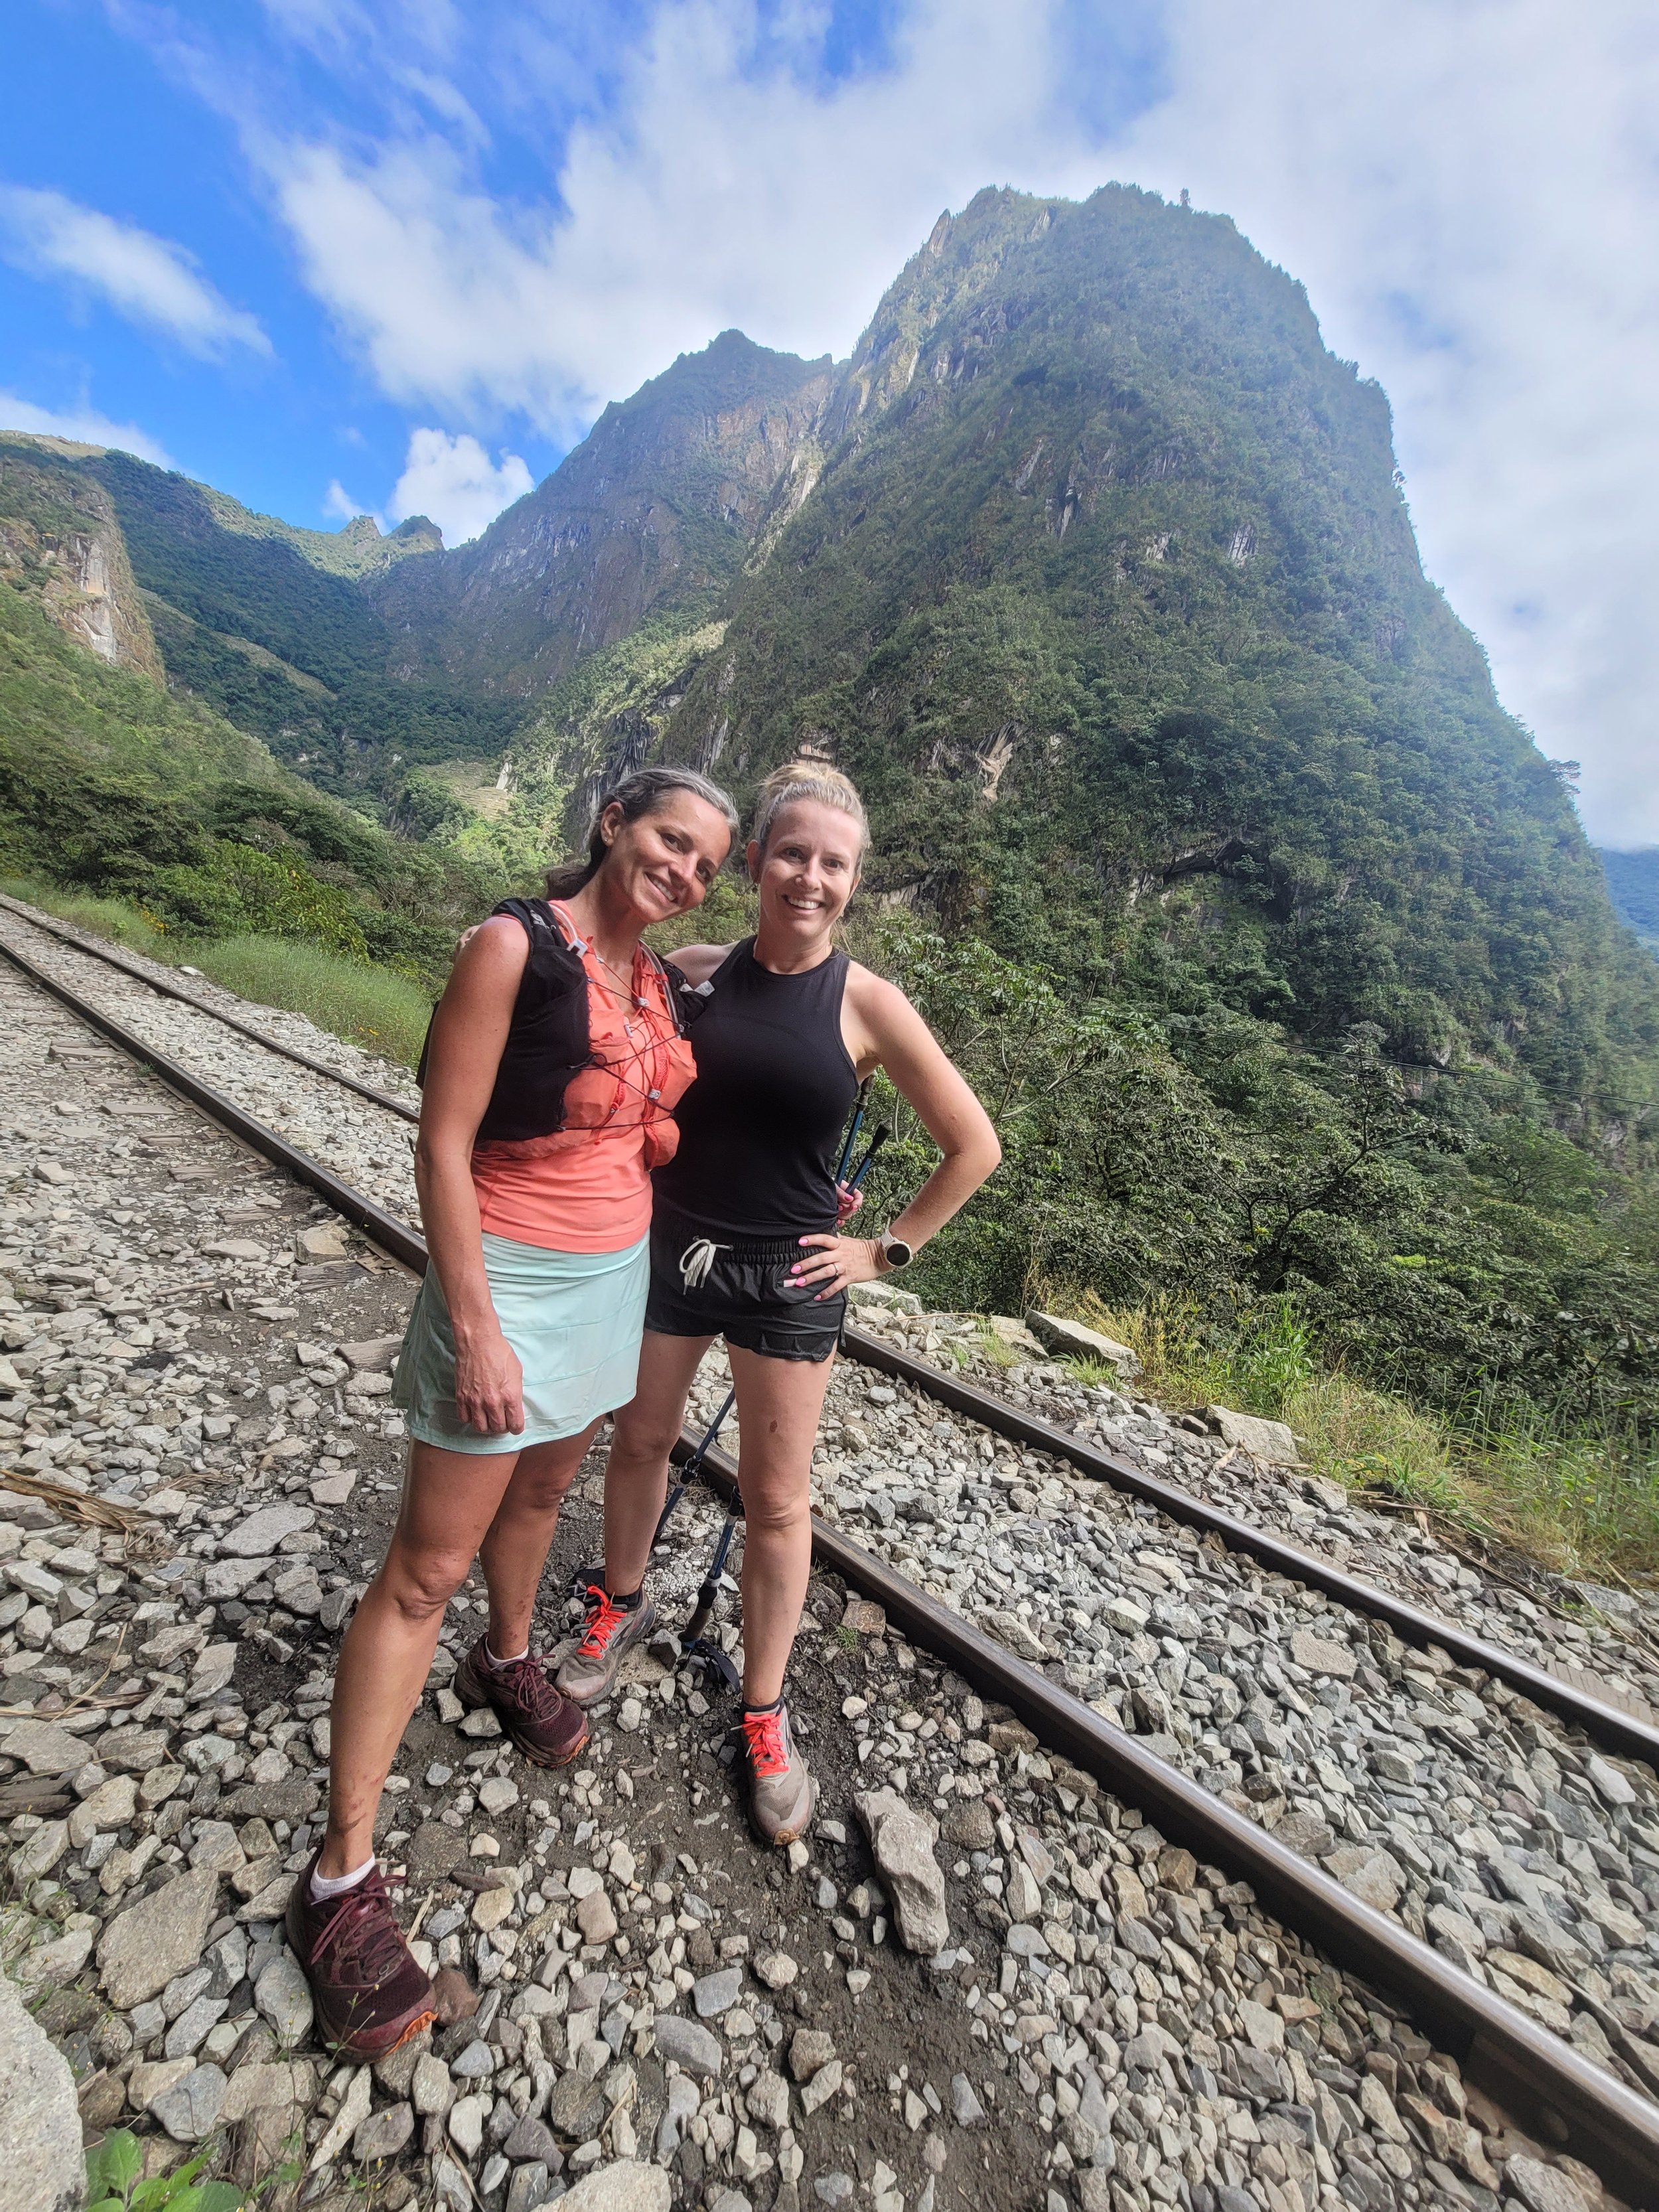   Name:  Barbalee   Hometown:  Rock Springs, Wyoming, USA   Which Runcation did you attend:  Run to Machu Picchu Peru   What is your profession:  Registered Nurse   How long have you been running?:  16 years.   Did you have experience running trails 